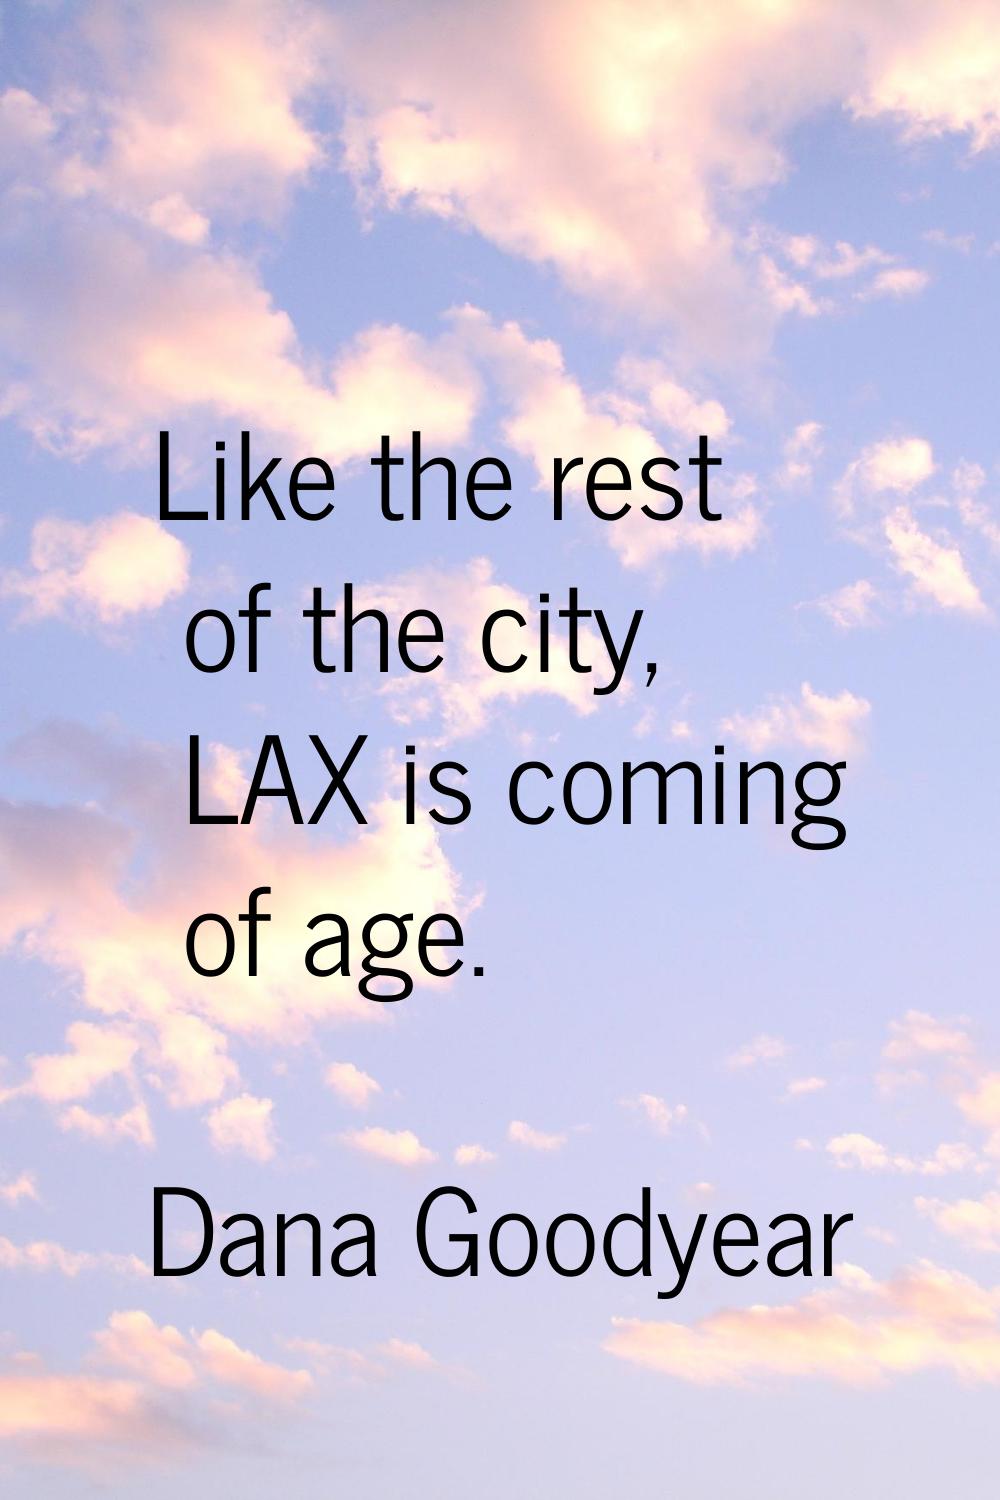 Like the rest of the city, LAX is coming of age.